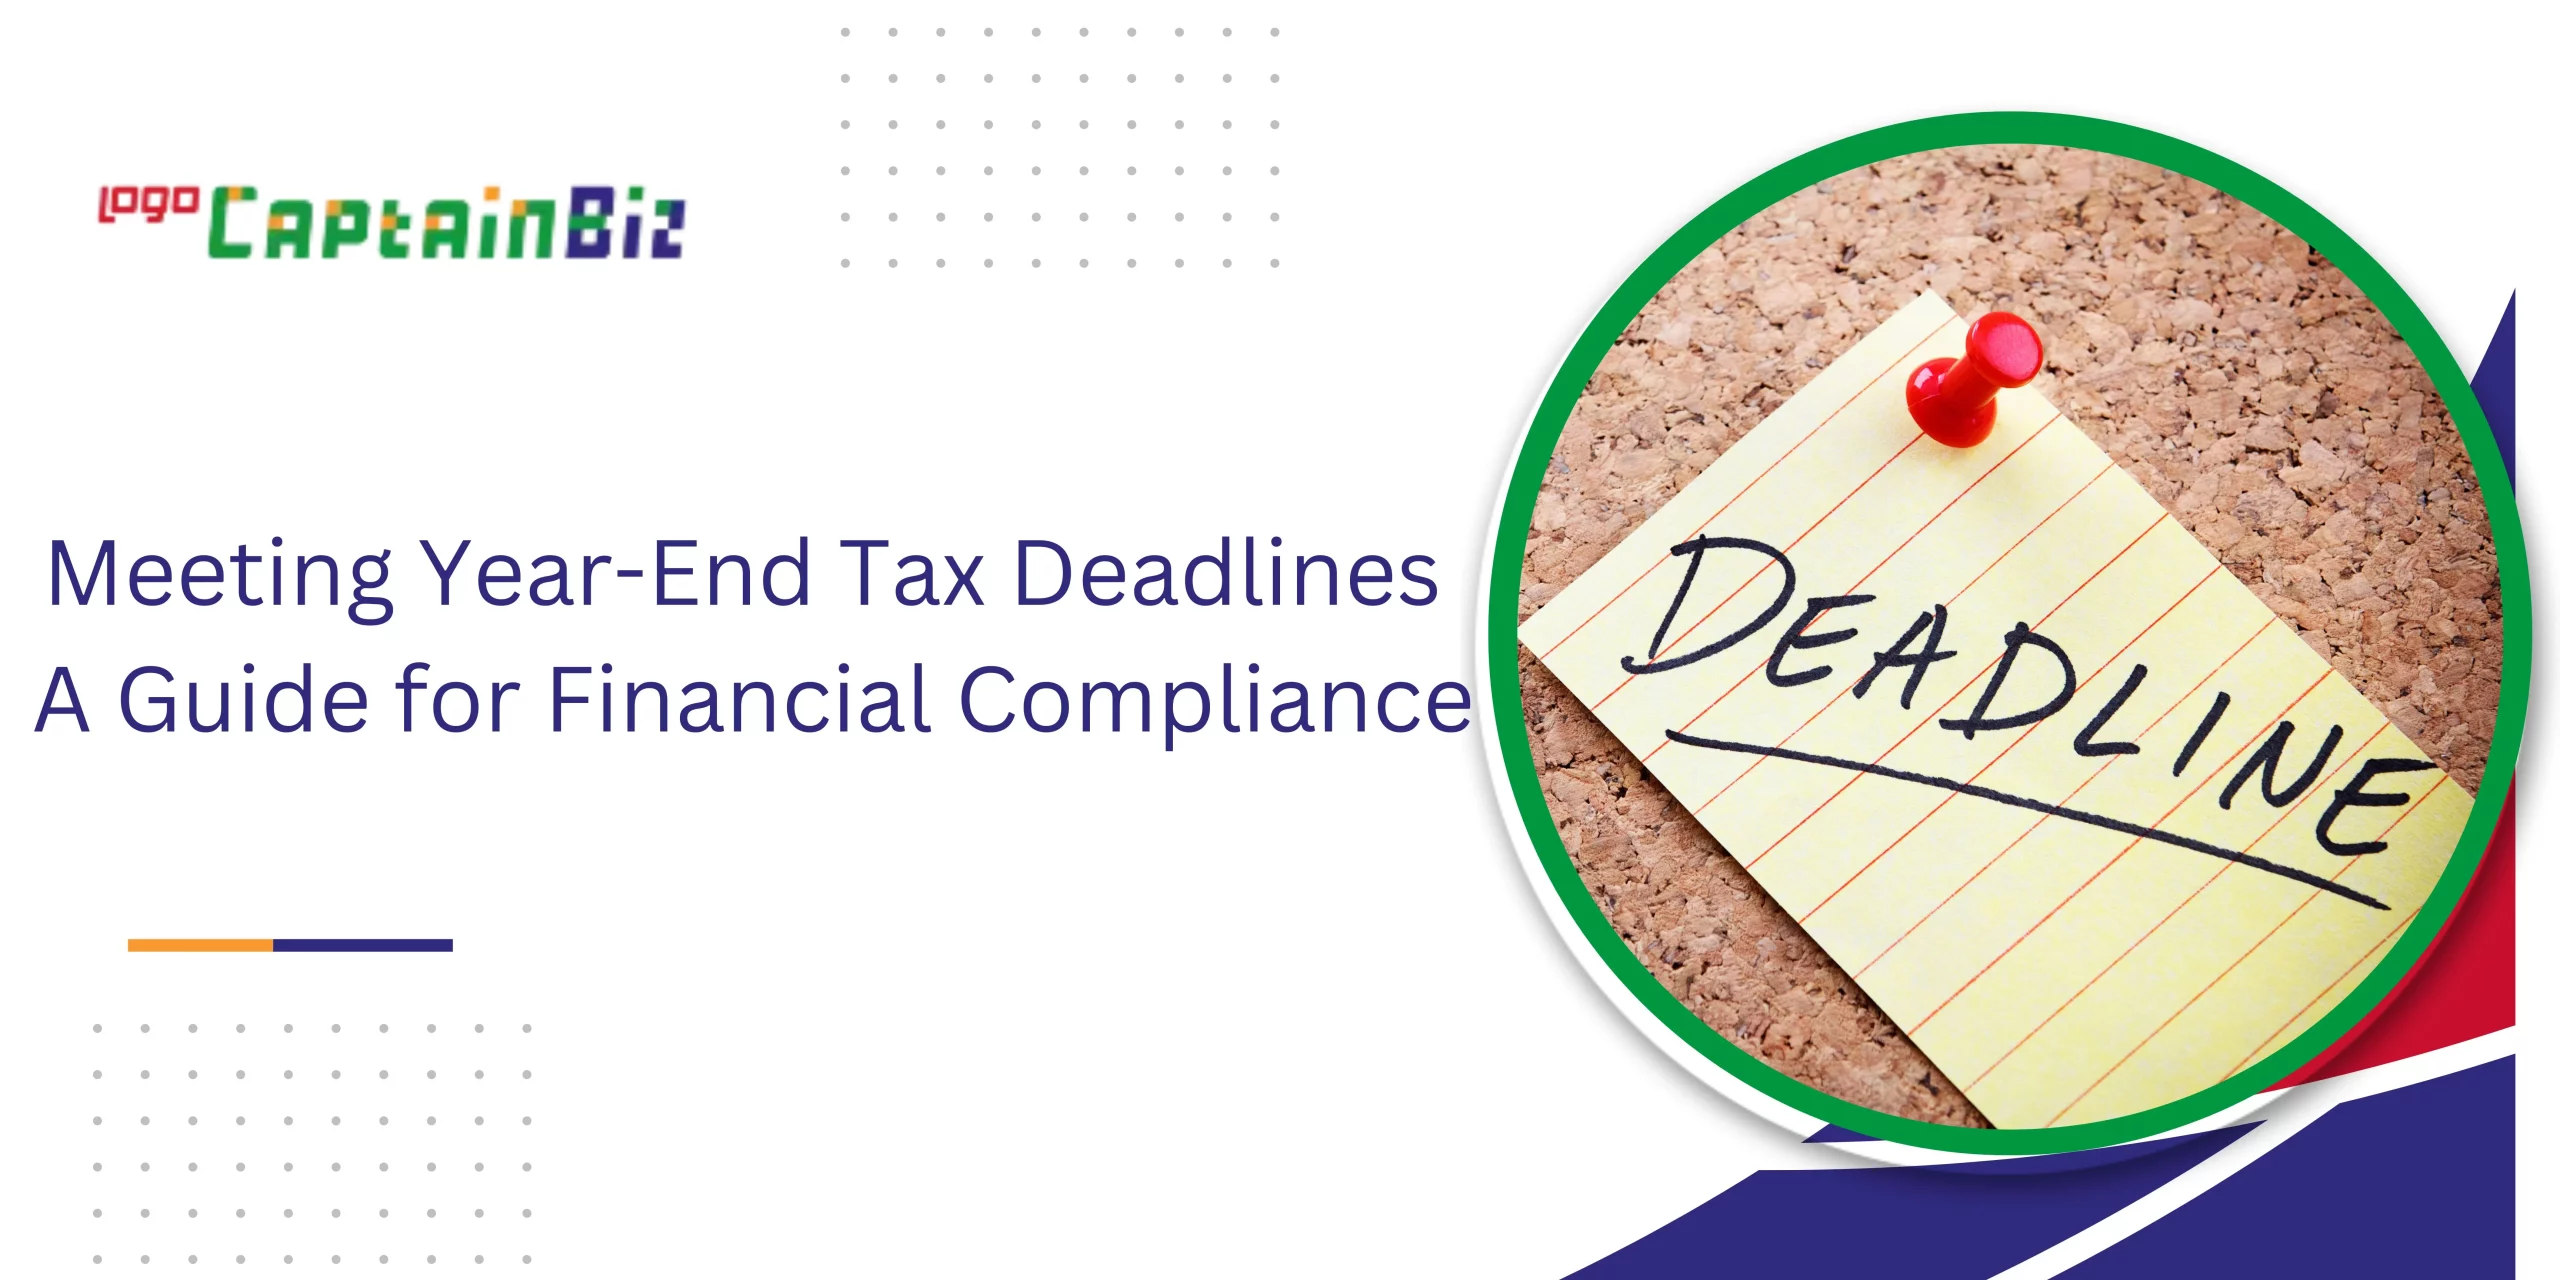 CaptainBiz: Meeting Year-End Tax Deadlines: A Guide for Financial Compliance